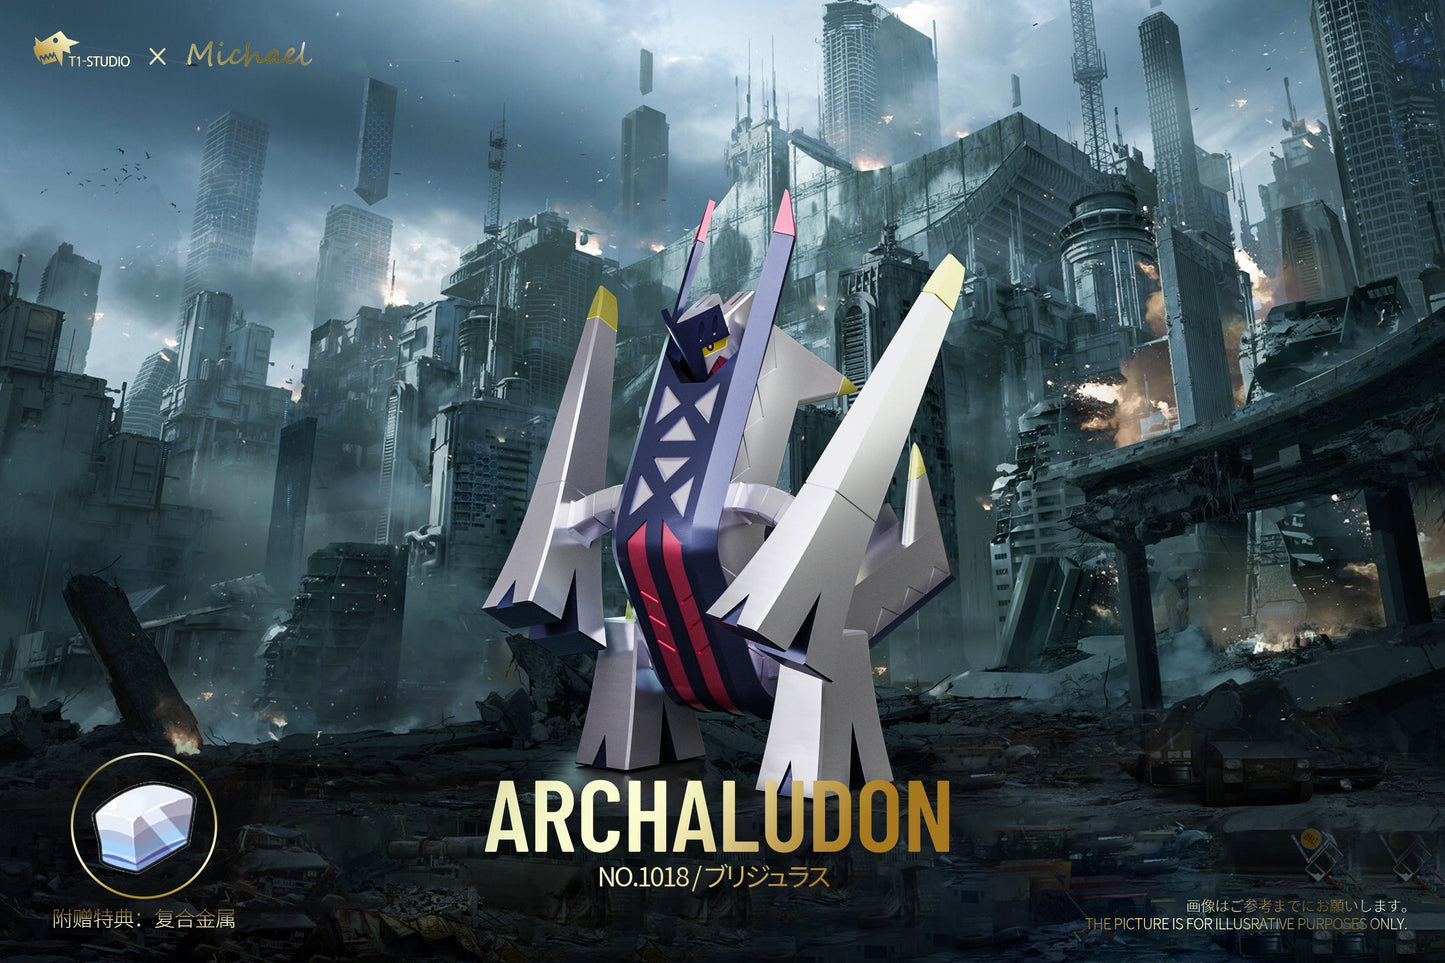 〖Sold Out〗Pokemon Scale World Archaludon #1018 1:20 - T1 Studio